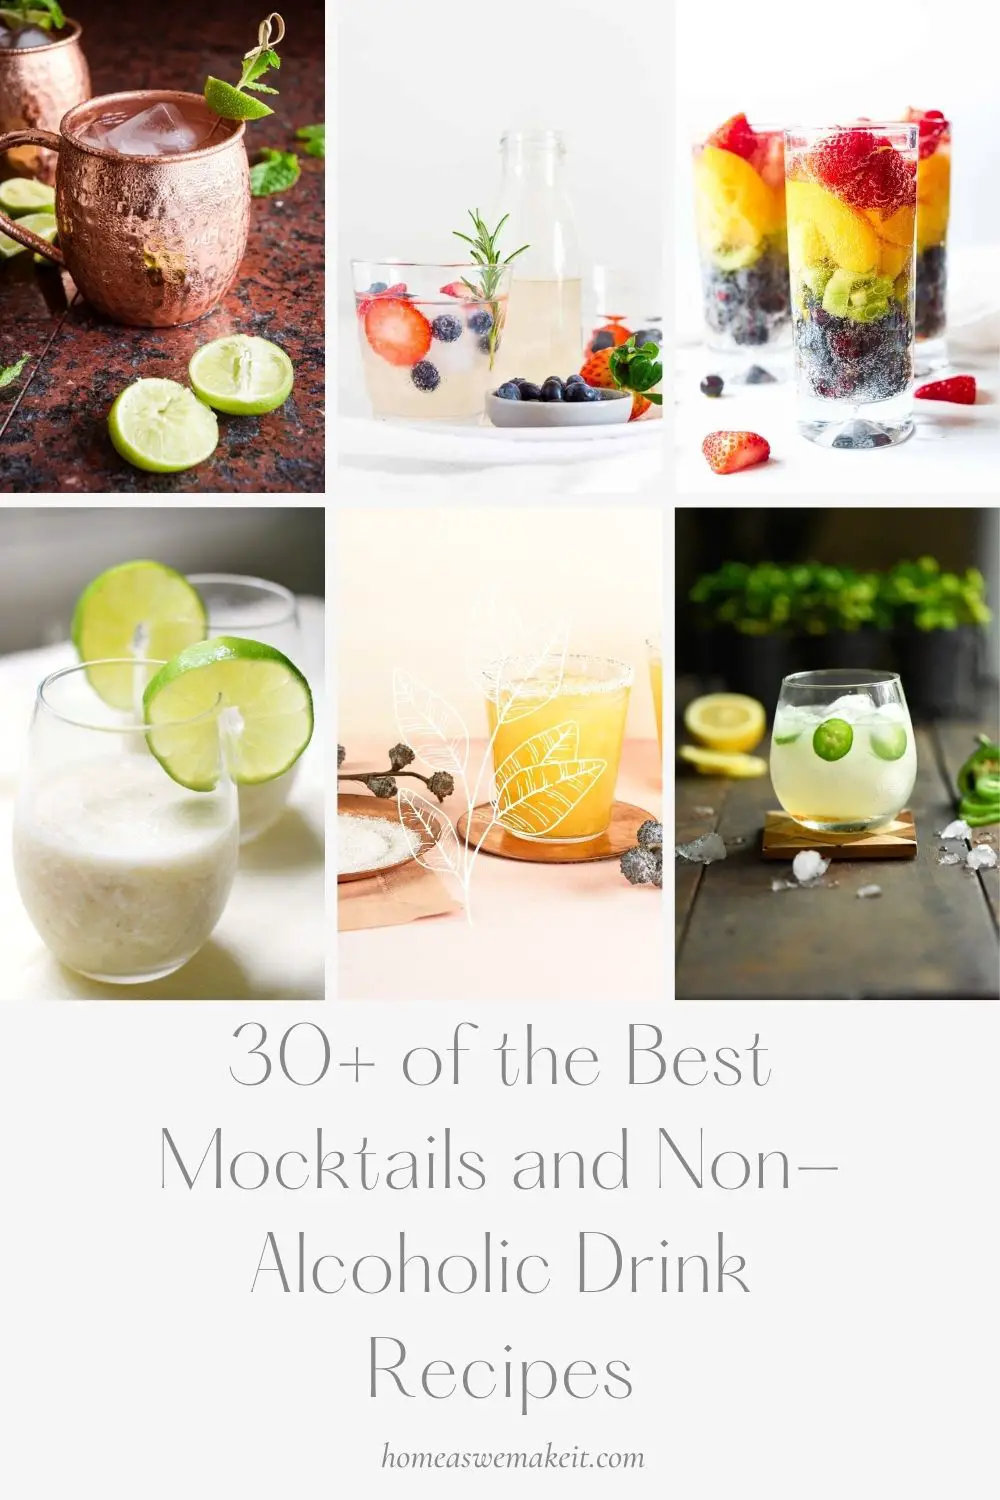 30+ of the Best Mocktails and Non-Alcoholic Drink Recipes